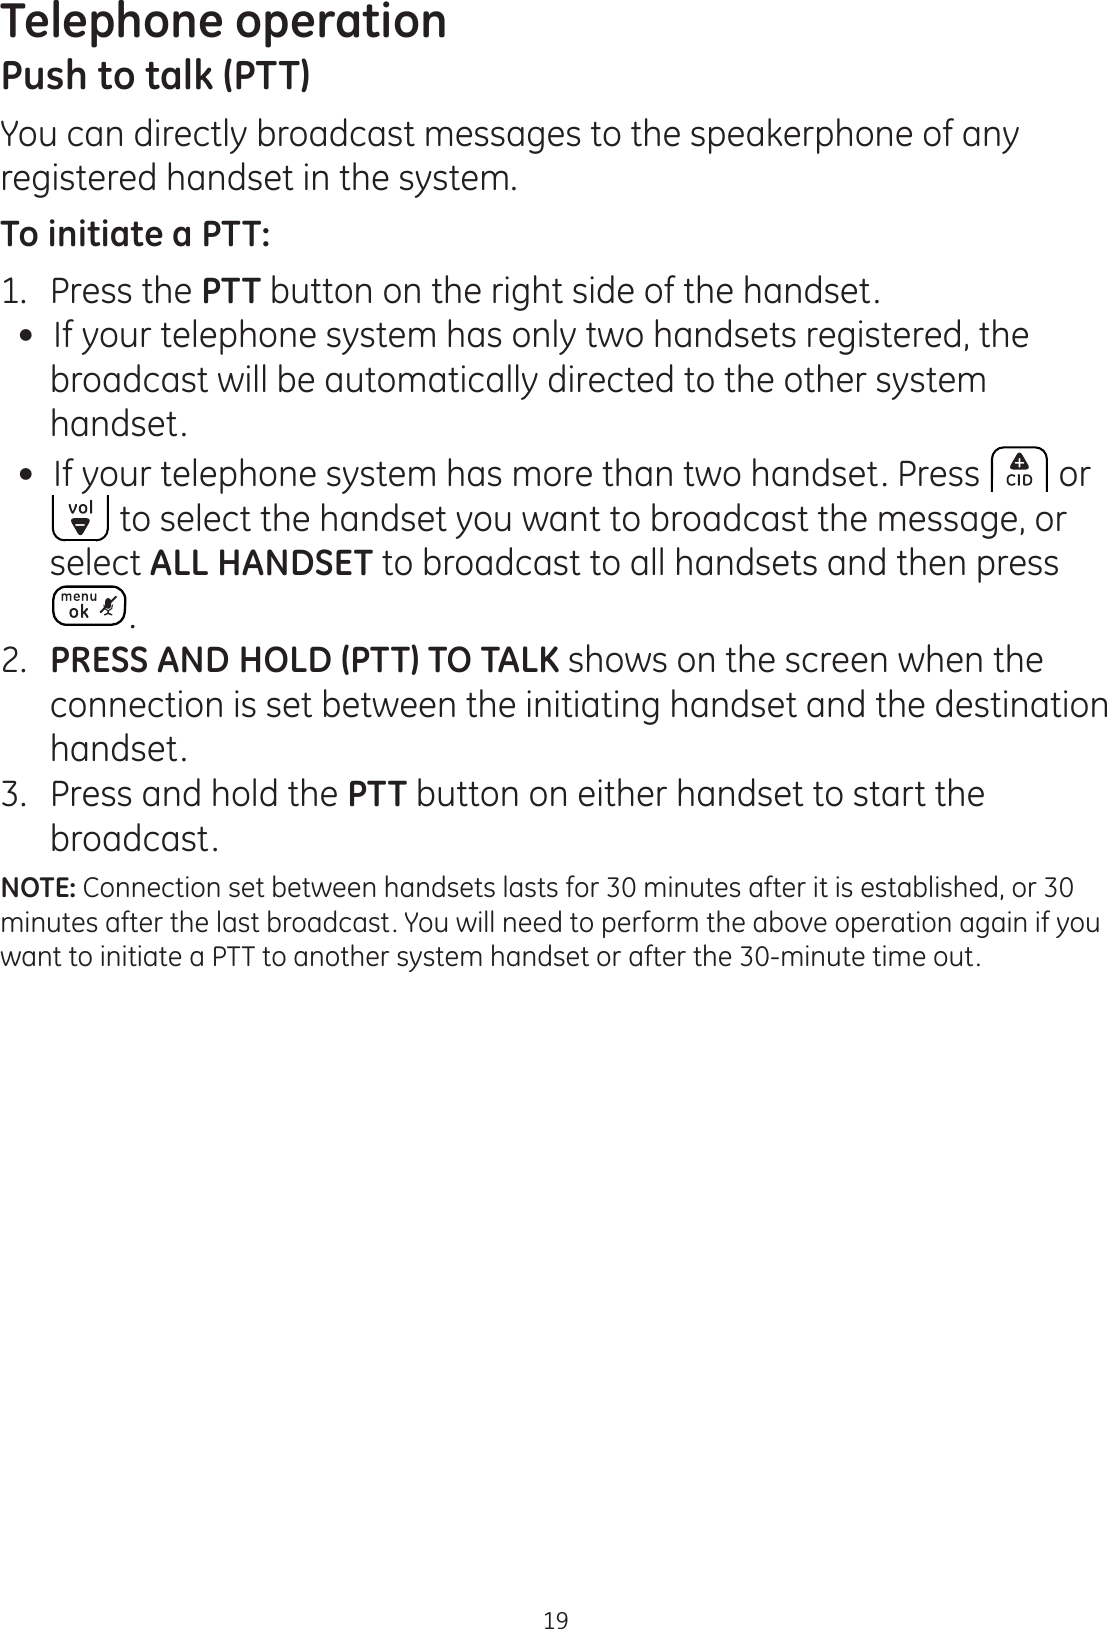 Telephone operation19Push to talk (PTT)You can directly broadcast messages to the speakerphone of any registered handset in the system. To initiate a PTT:1.   Press the PTT button on the right side of the handset. If your telephone system has only two handsets registered, the broadcast will be automatically directed to the other system handset. If your telephone system has more than two handset. Press  or  to select the handset you want to broadcast the message, or select ALL HANDSET to broadcast to all handsets and then press . 2.   PRESS AND HOLD (PTT) TO TALK shows on the screen when the connection is set between the initiating handset and the destination handset. 3.   Press and hold the PTT button on either handset to start the broadcast. NOTE: Connection set between handsets lasts for 30 minutes after it is established, or 30 minutes after the last broadcast. You will need to perform the above operation again if you want to initiate a PTT to another system handset or after the 30-minute time out. 